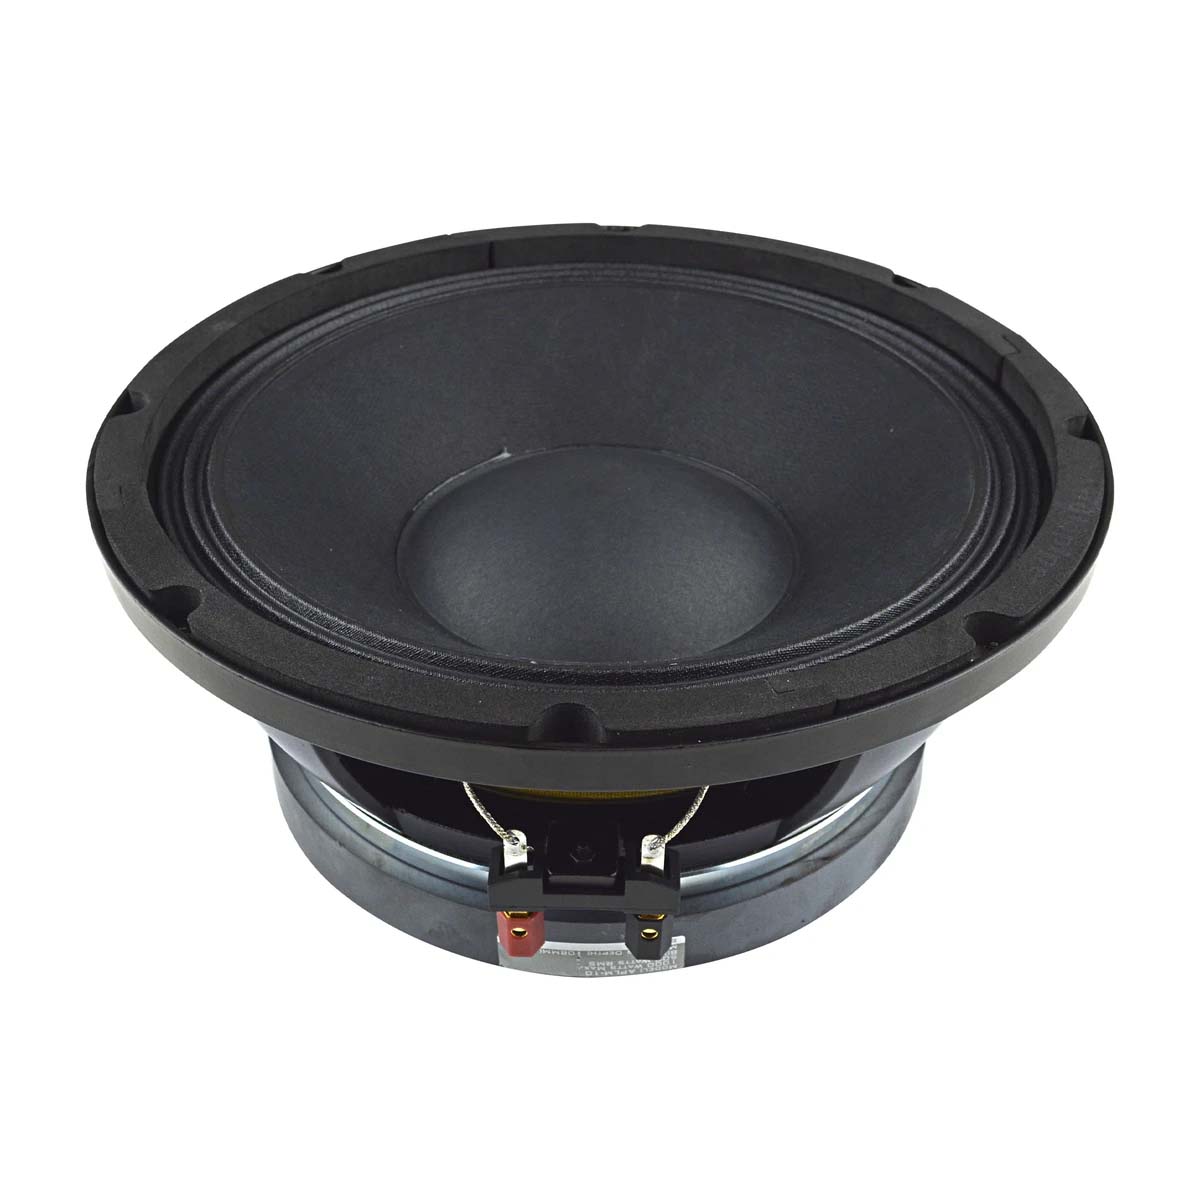 Audiopipe APLM10 10" Low/Midbass Driver, 1000W Max, 8 ohm